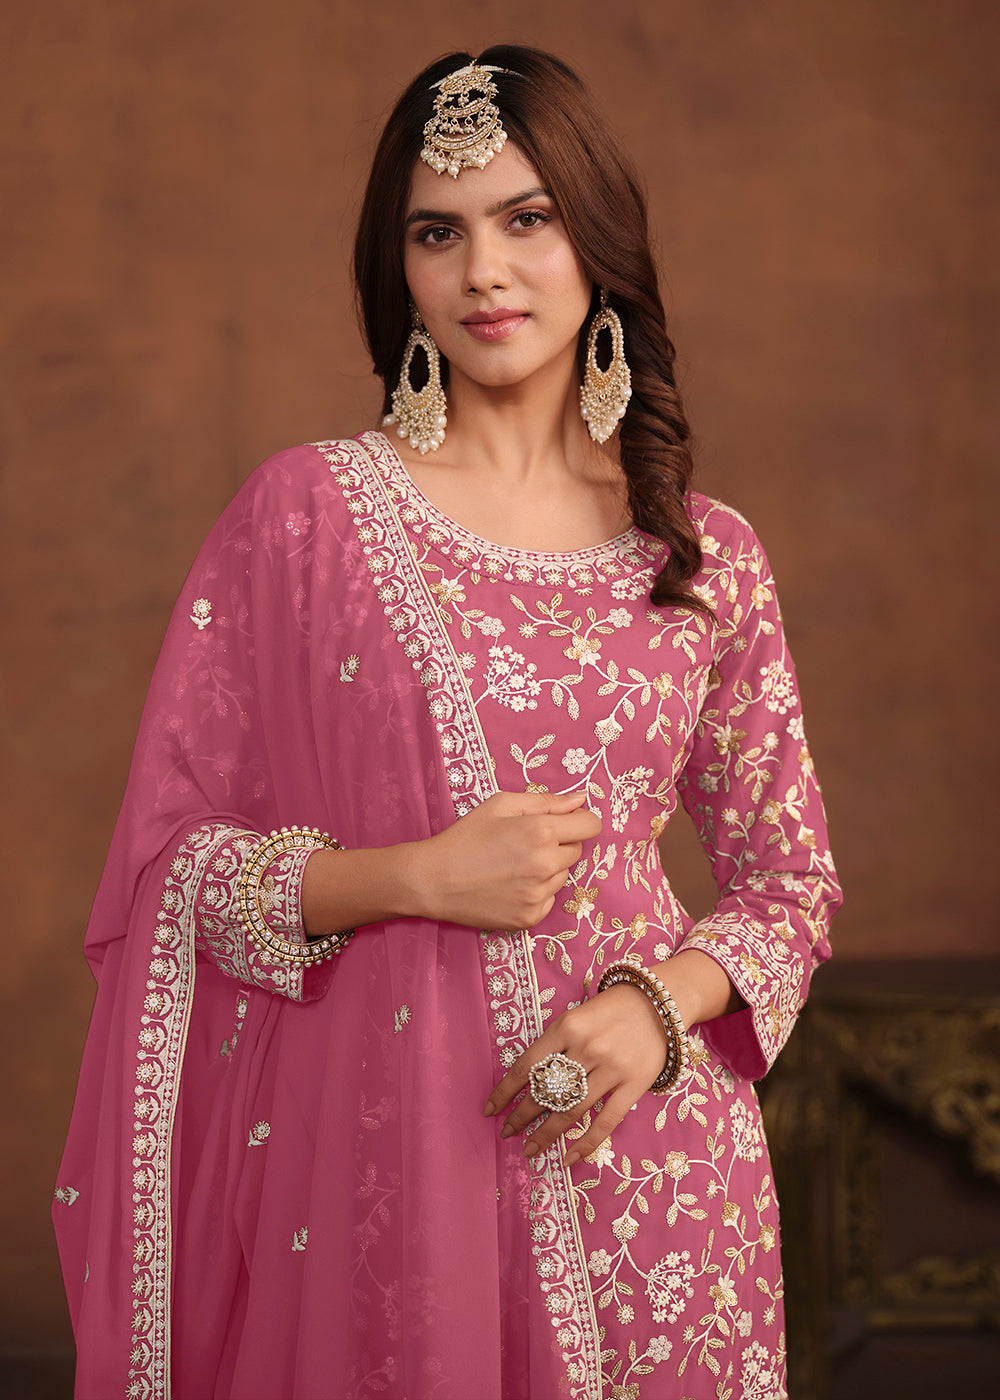 Buy Now Faux Georgette Pink Embroidered Festive Salwar Suit Online in USA, UK, Canada, Germany, Australia & Worldwide at Empress Clothing.